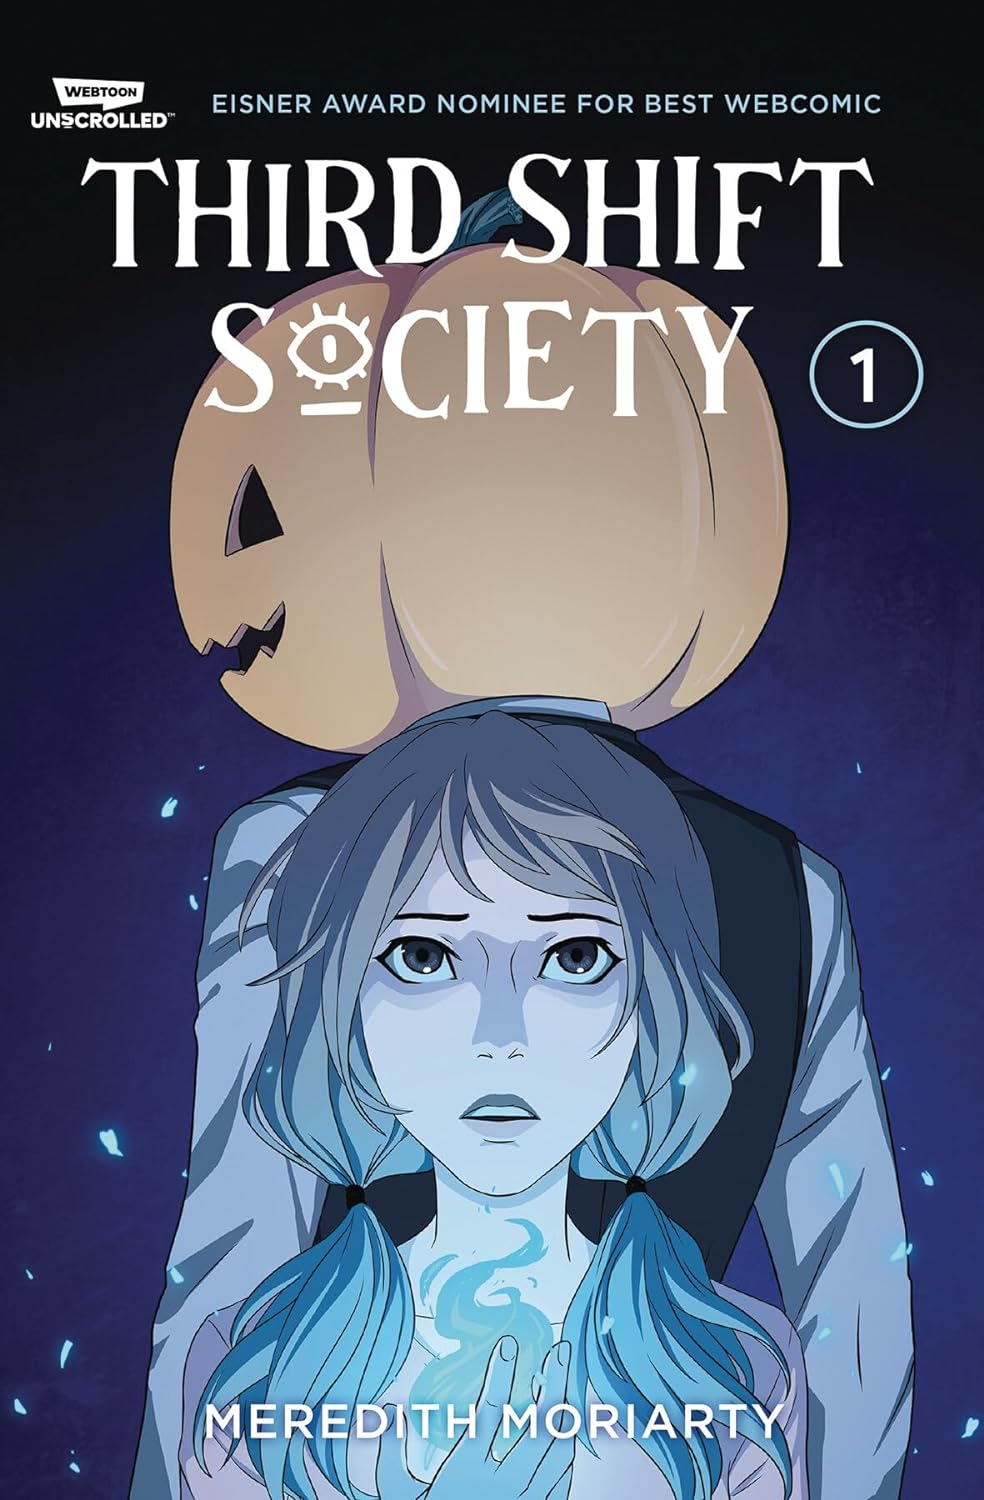 Third Shift Society Volume One by Meredith Moriarty